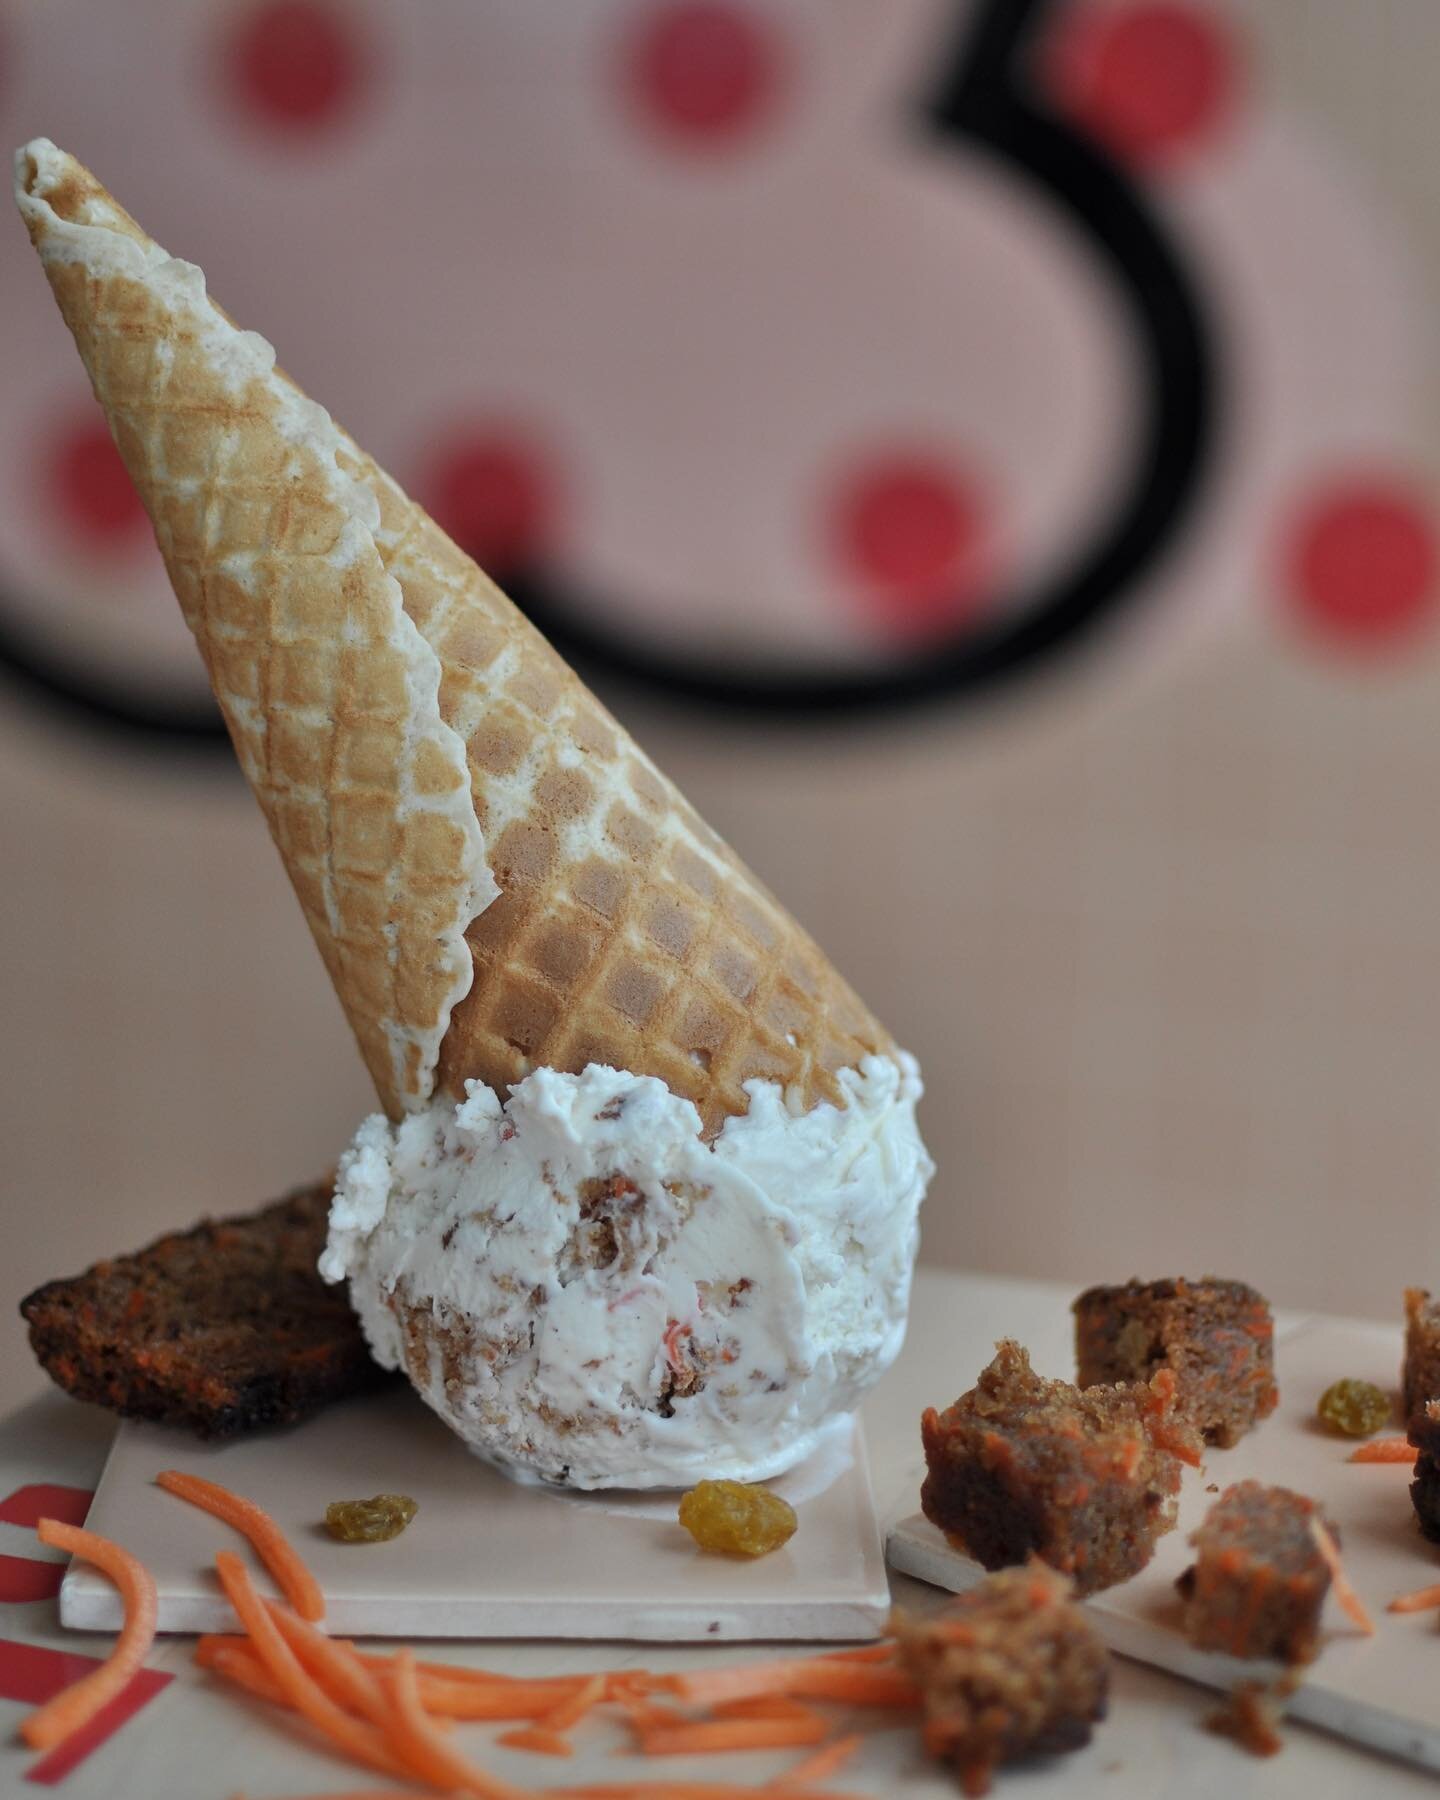 Who&rsquo;s in team CARROT CAKE ice cream? This seasonal is back, with homemade carrot cake folded in cream cheese ice cream. It&rsquo;s all you think it is and even more, and is only at the store for the spring! 🥕
.
.
.
#xoicecream #madewithlove #y